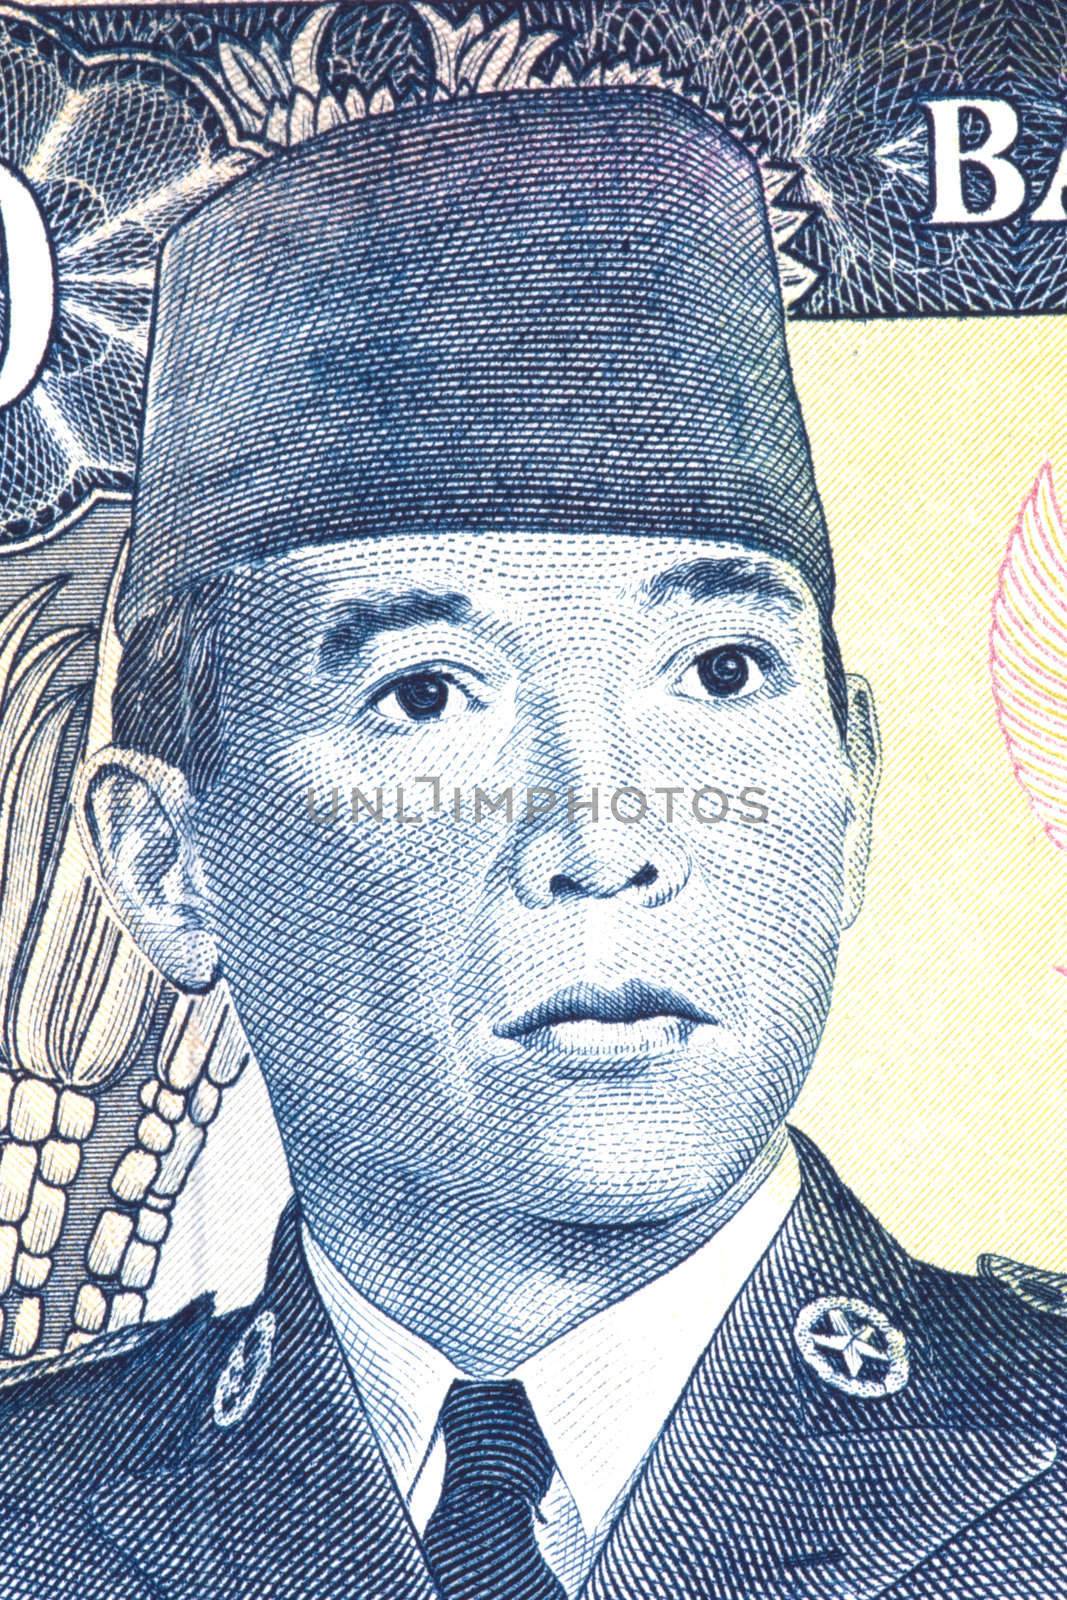 President Suharto on Currency Note by shariffc